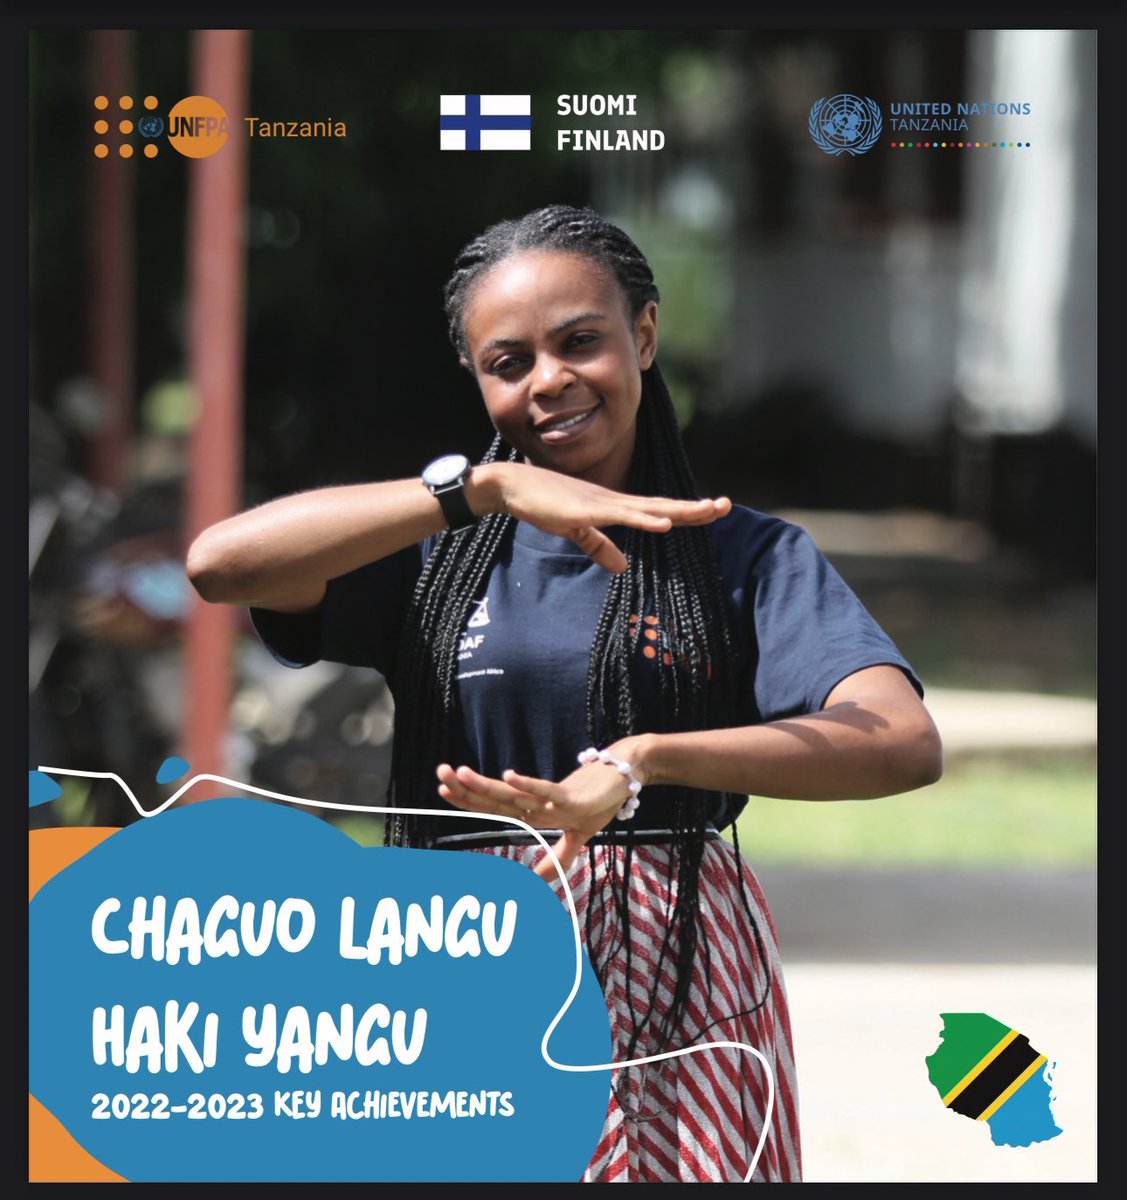 Latest #UNFPA 🇹🇿 Publication #CLHY 2022-2023 Key Achievements ✅ Read more 👇🏾 tanzania.unfpa.org/en/publication… The ‘My Rights My Choices: Protecting the Rights & Choices of Women & Girls, particularly Women & Girls with Disabilities in #Tanzania🇹🇿,funded by the Government of #Finland 🇫🇮